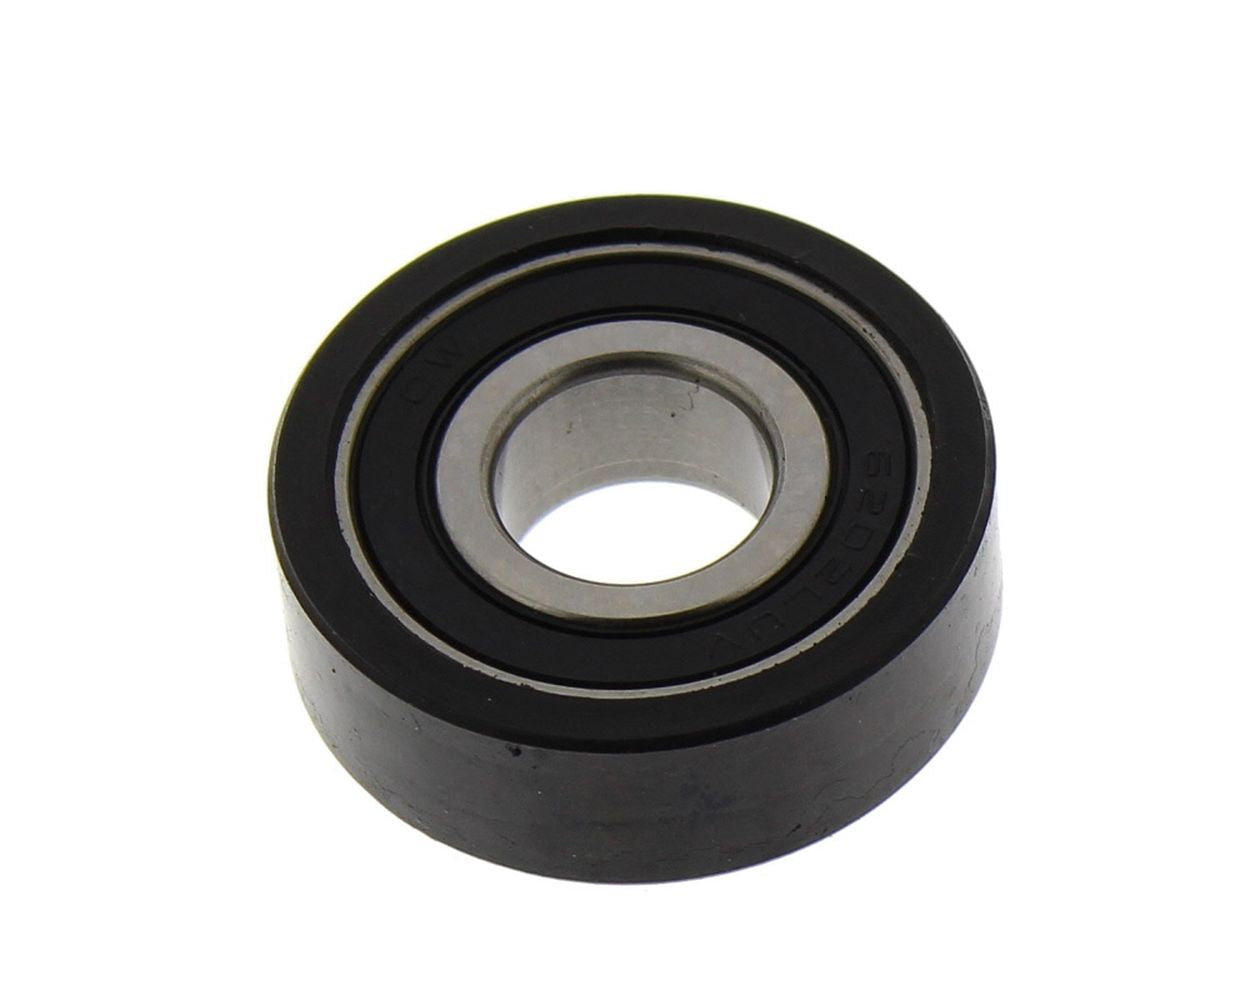 Candy Hoover Tumble Dryer Drum Bearing Support Wheel